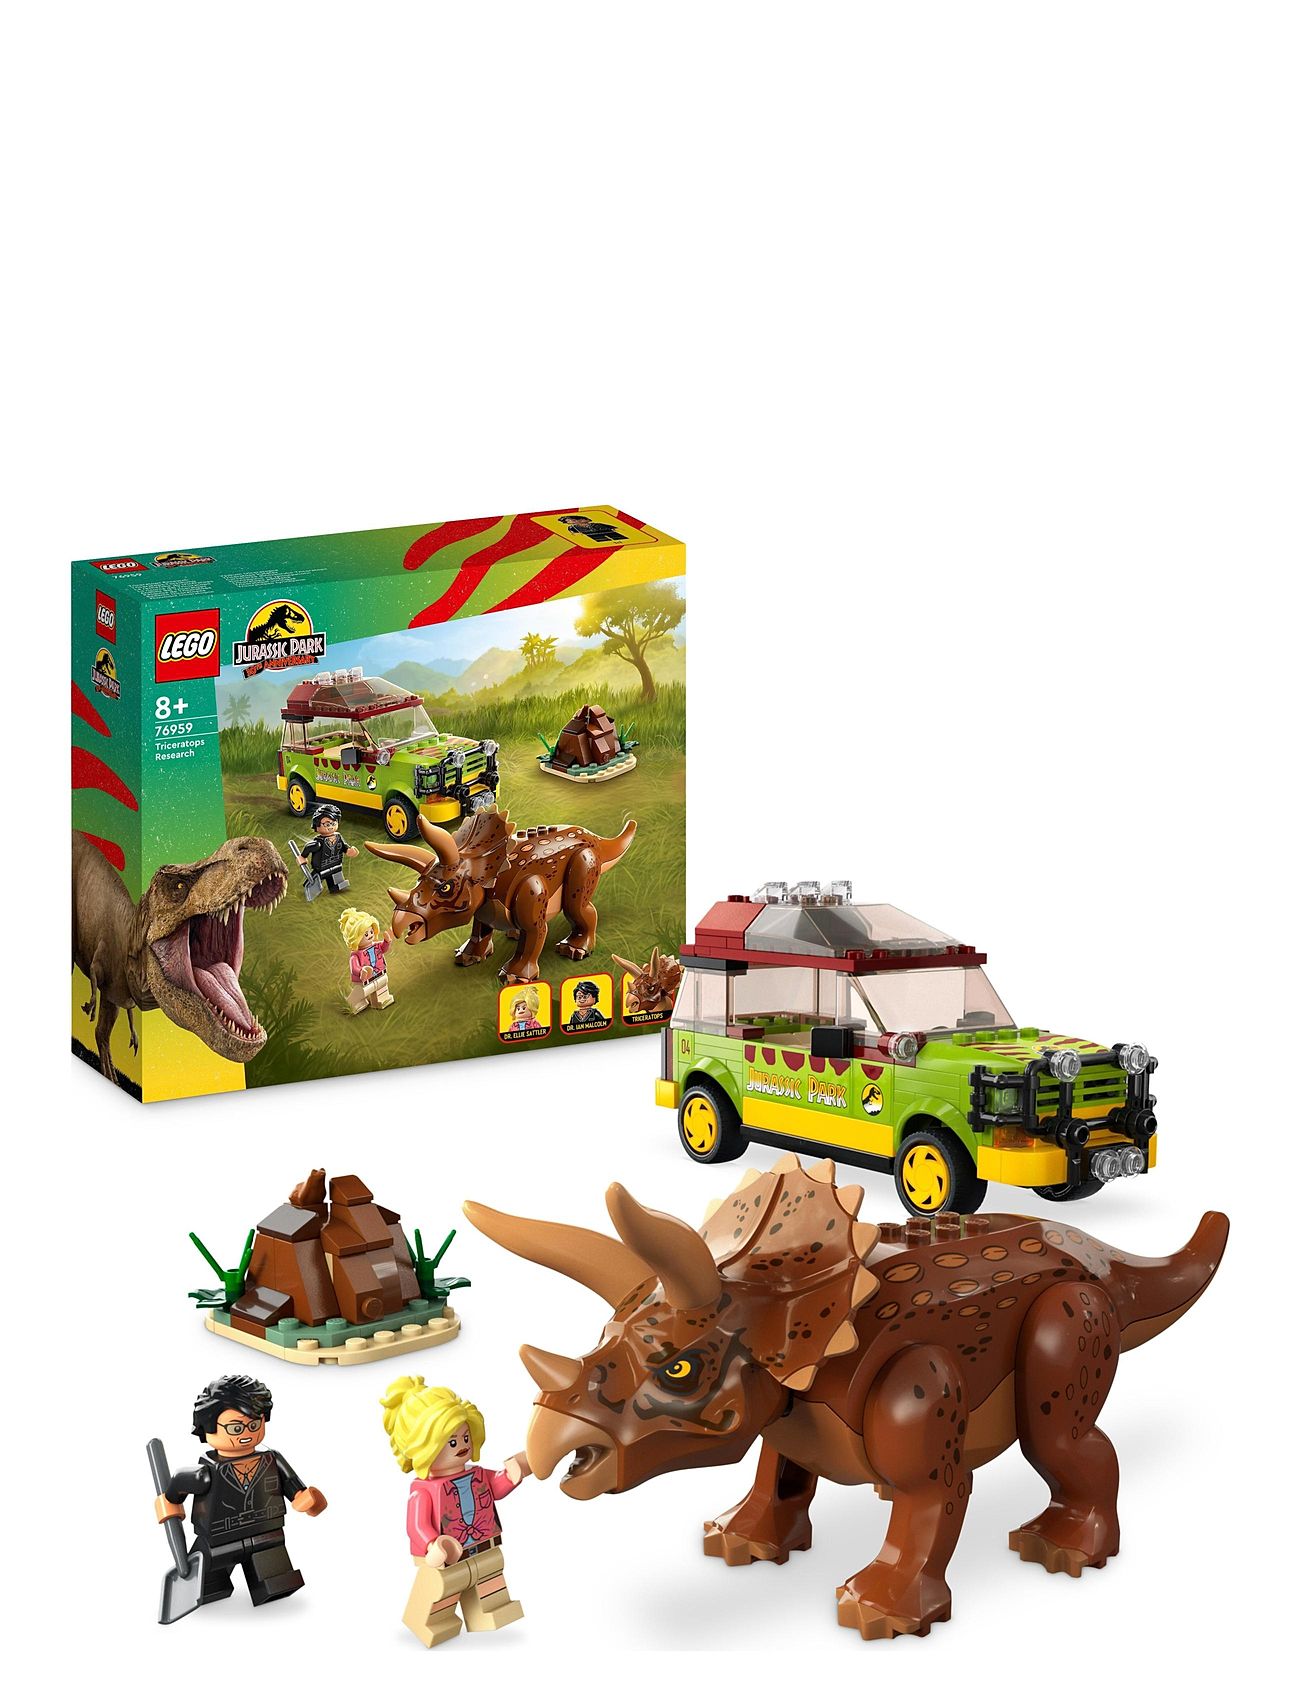 LEGO "Triceratops Research With Car Toy Toys Lego jurassic World Multi/patterned LEGO"